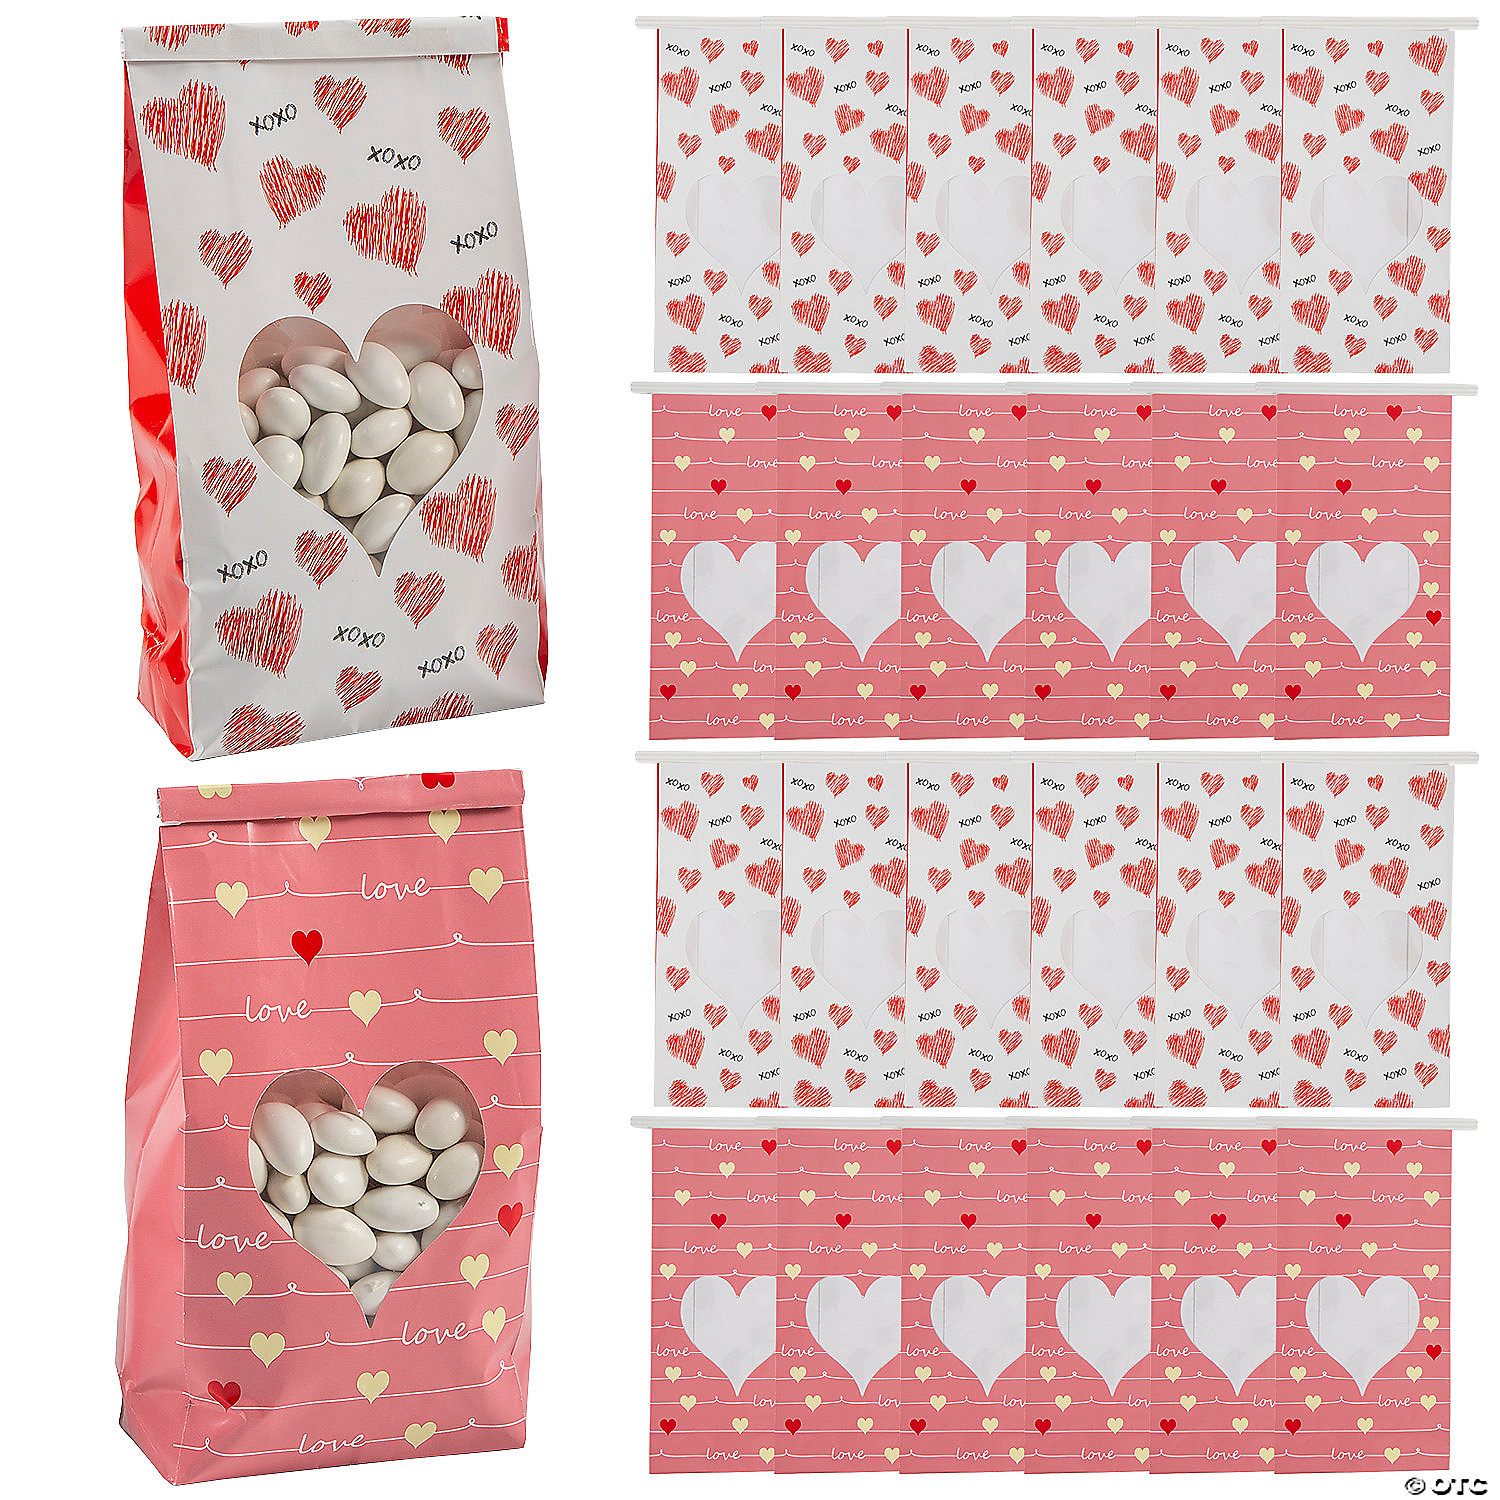 FAVOUR BAGS PRETTY WHITE HEARTS & PINK CELLOPHANE BAGS,COOKIE BAGS,SWEETIE BAGS 